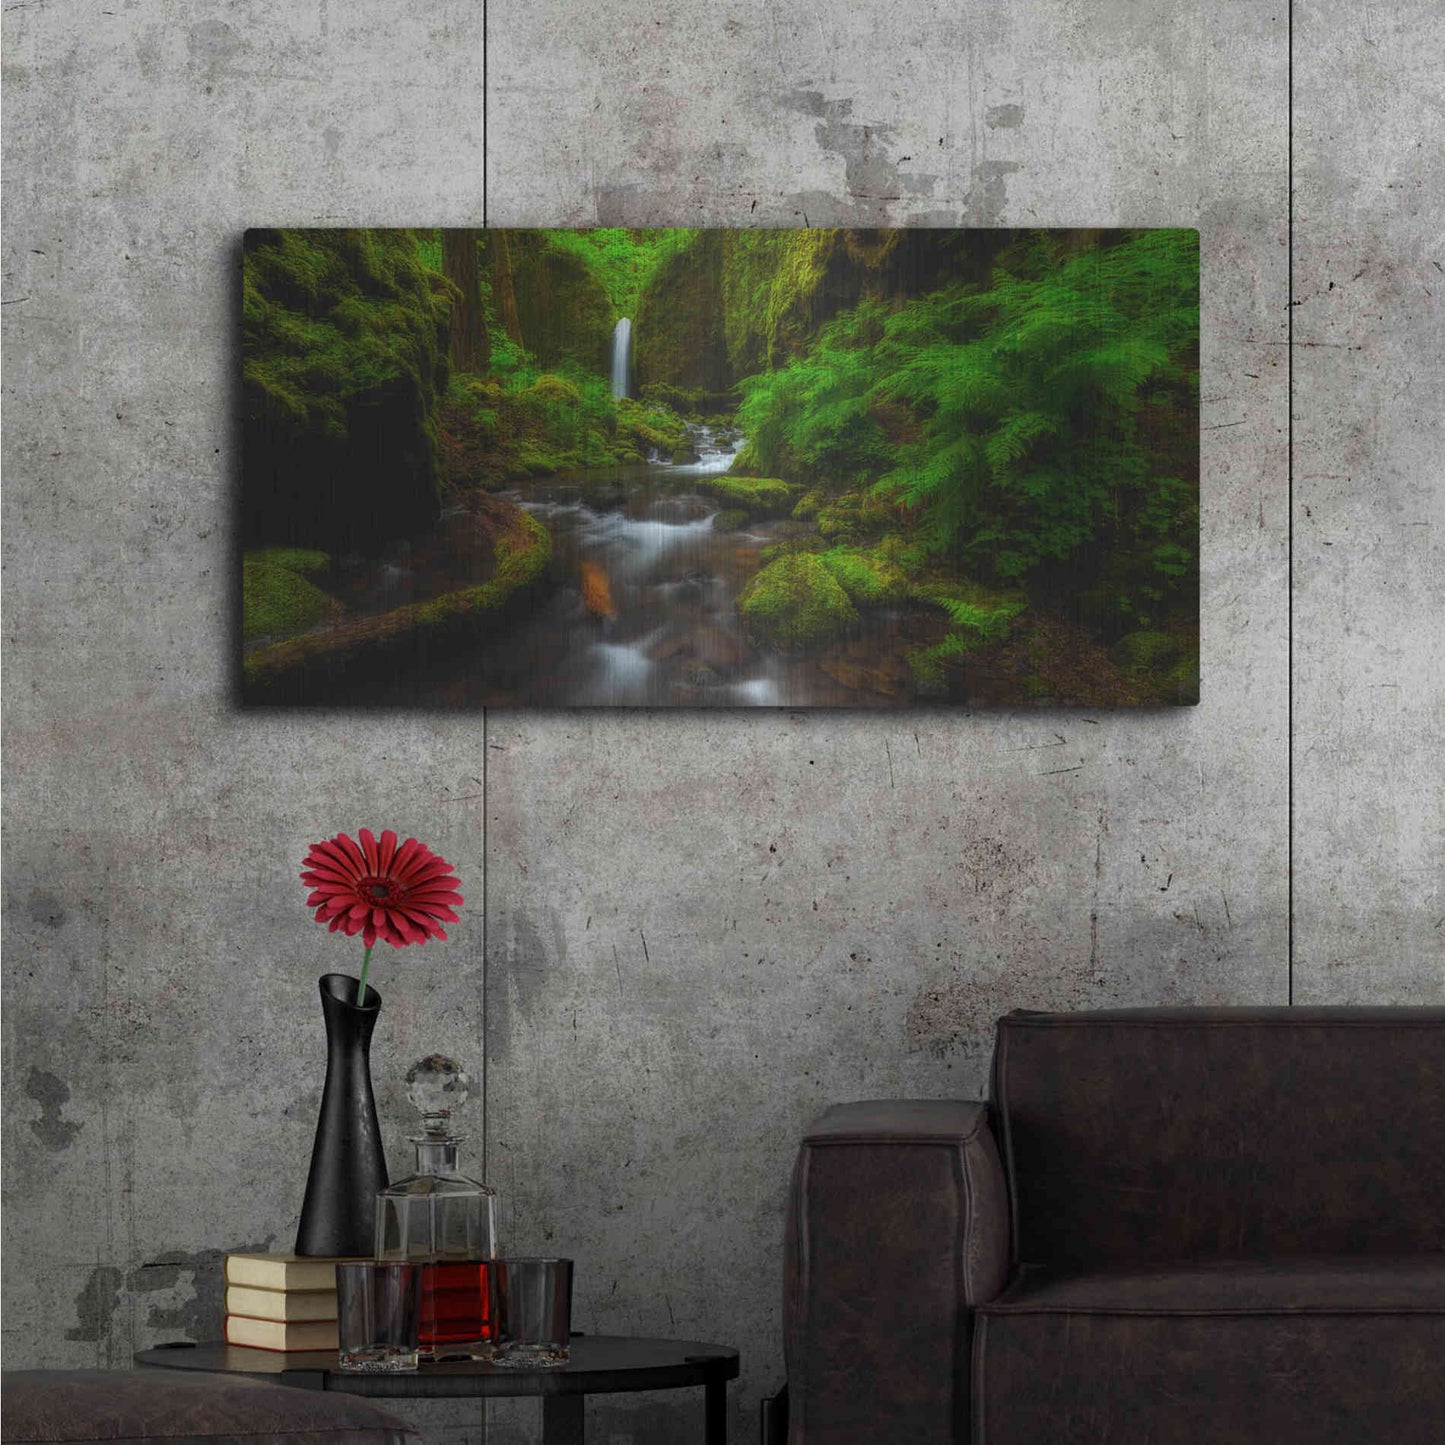 Luxe Metal Art 'Early Morning At The Grotto' by Darren White, Metal Wall Art,48x24